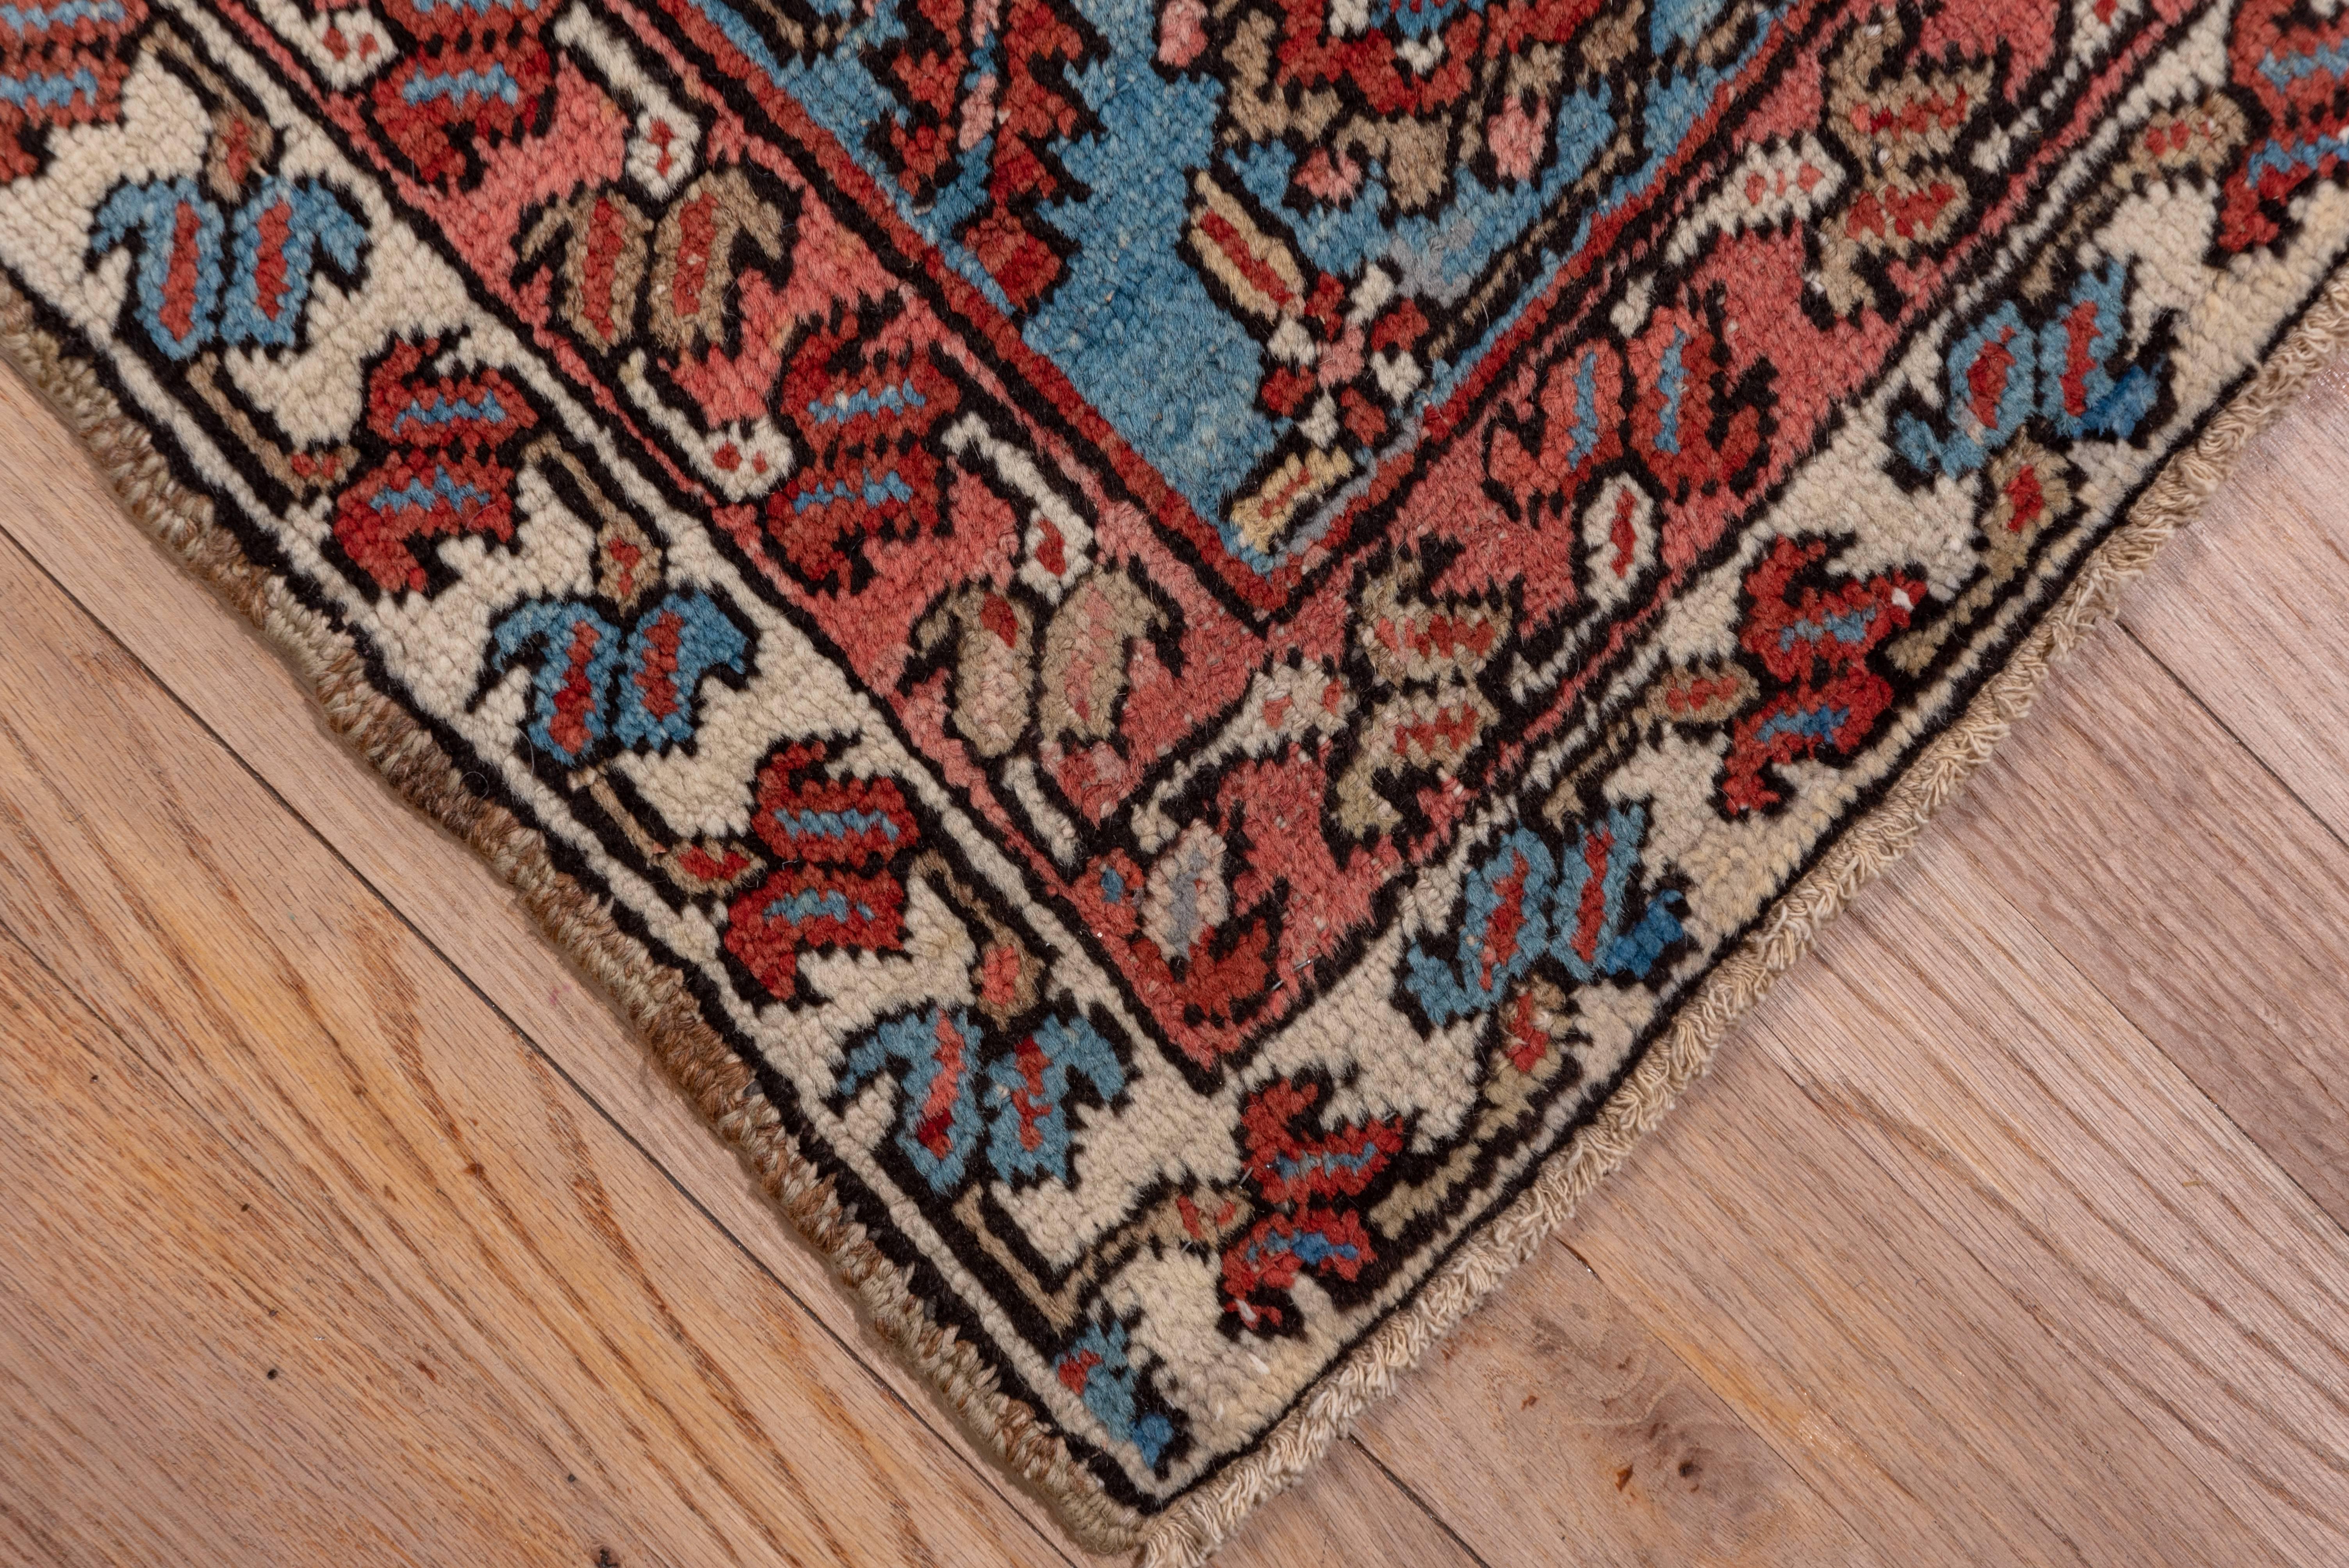 Of higher Serapi grade, this NW Persian village carpet displays a terracotta red subfield centred by a palmette pendanted navy nested medallion with ivory Herati patterned ivory corners. The floral cdecoration of the subfield is semi-geometric